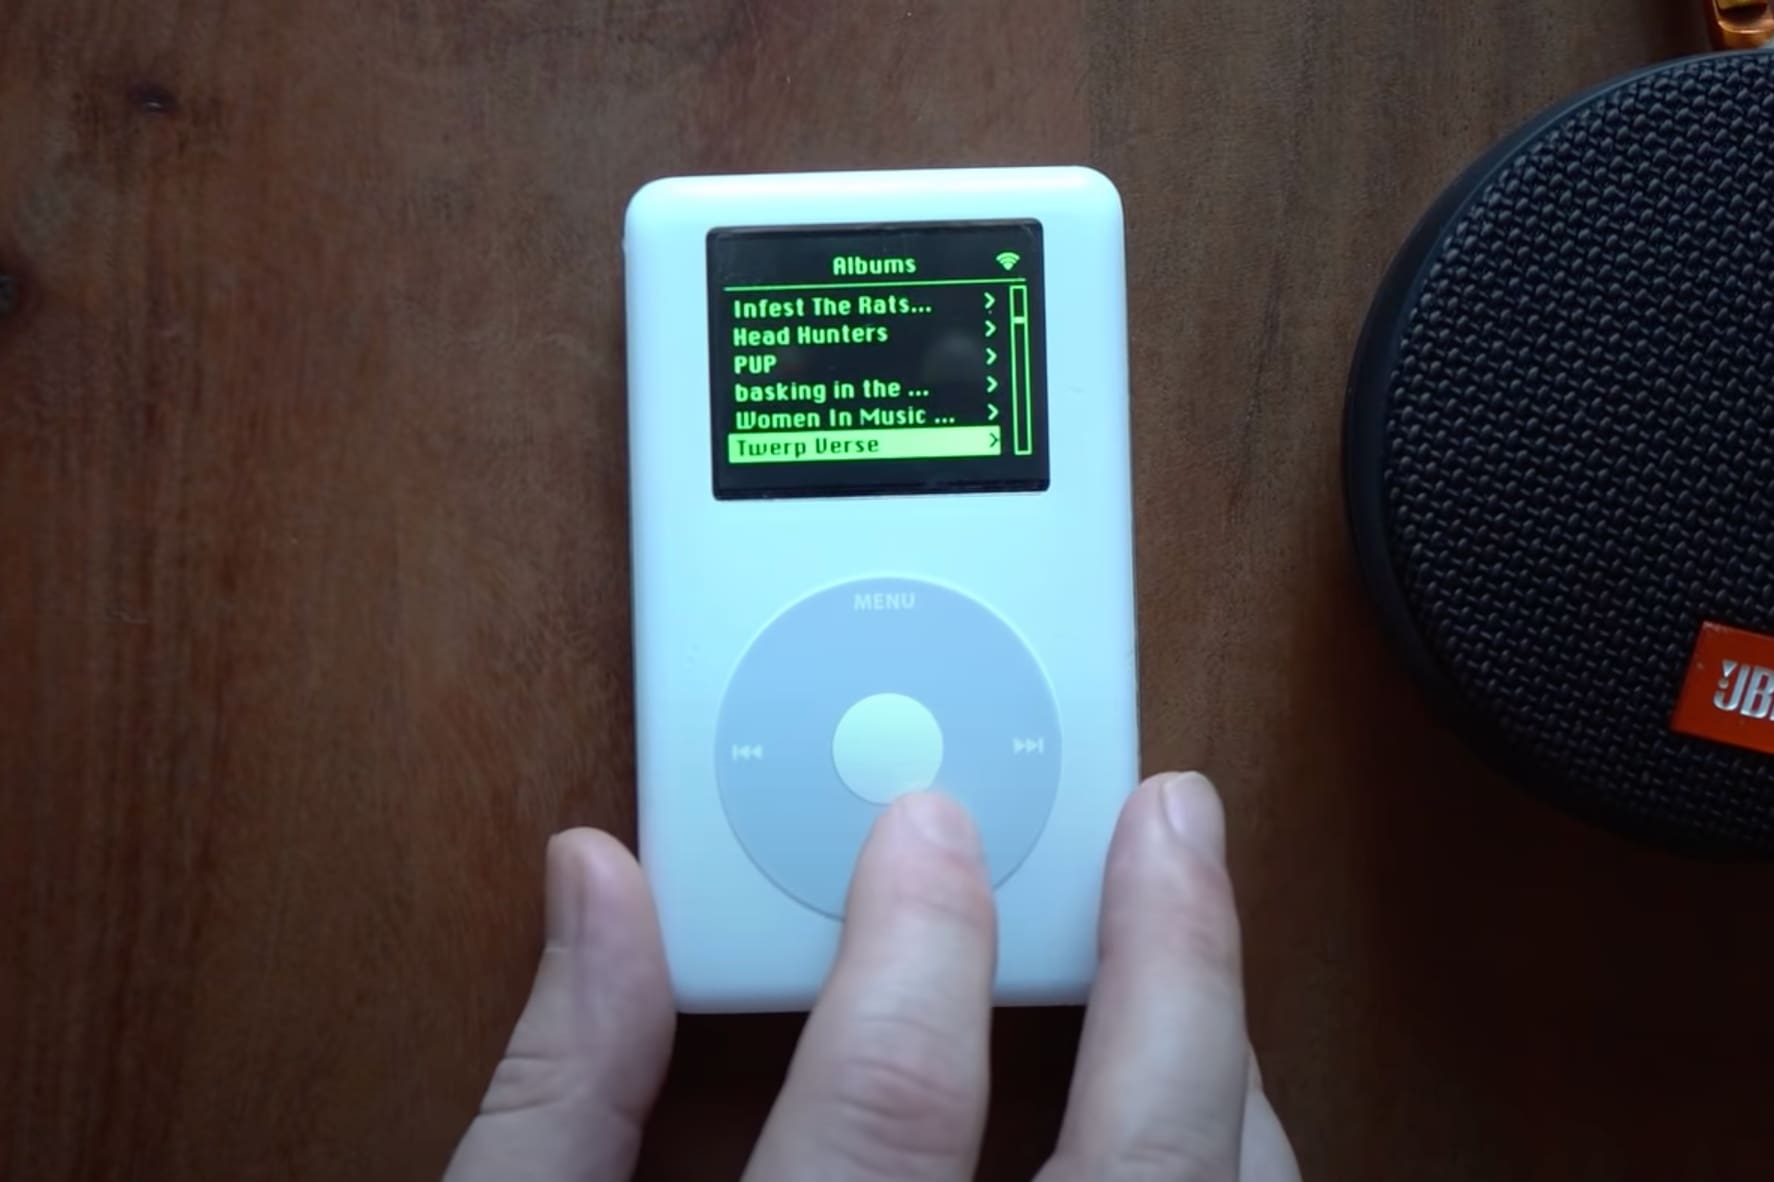 instal the last version for ipod Spotify 1.2.16.947